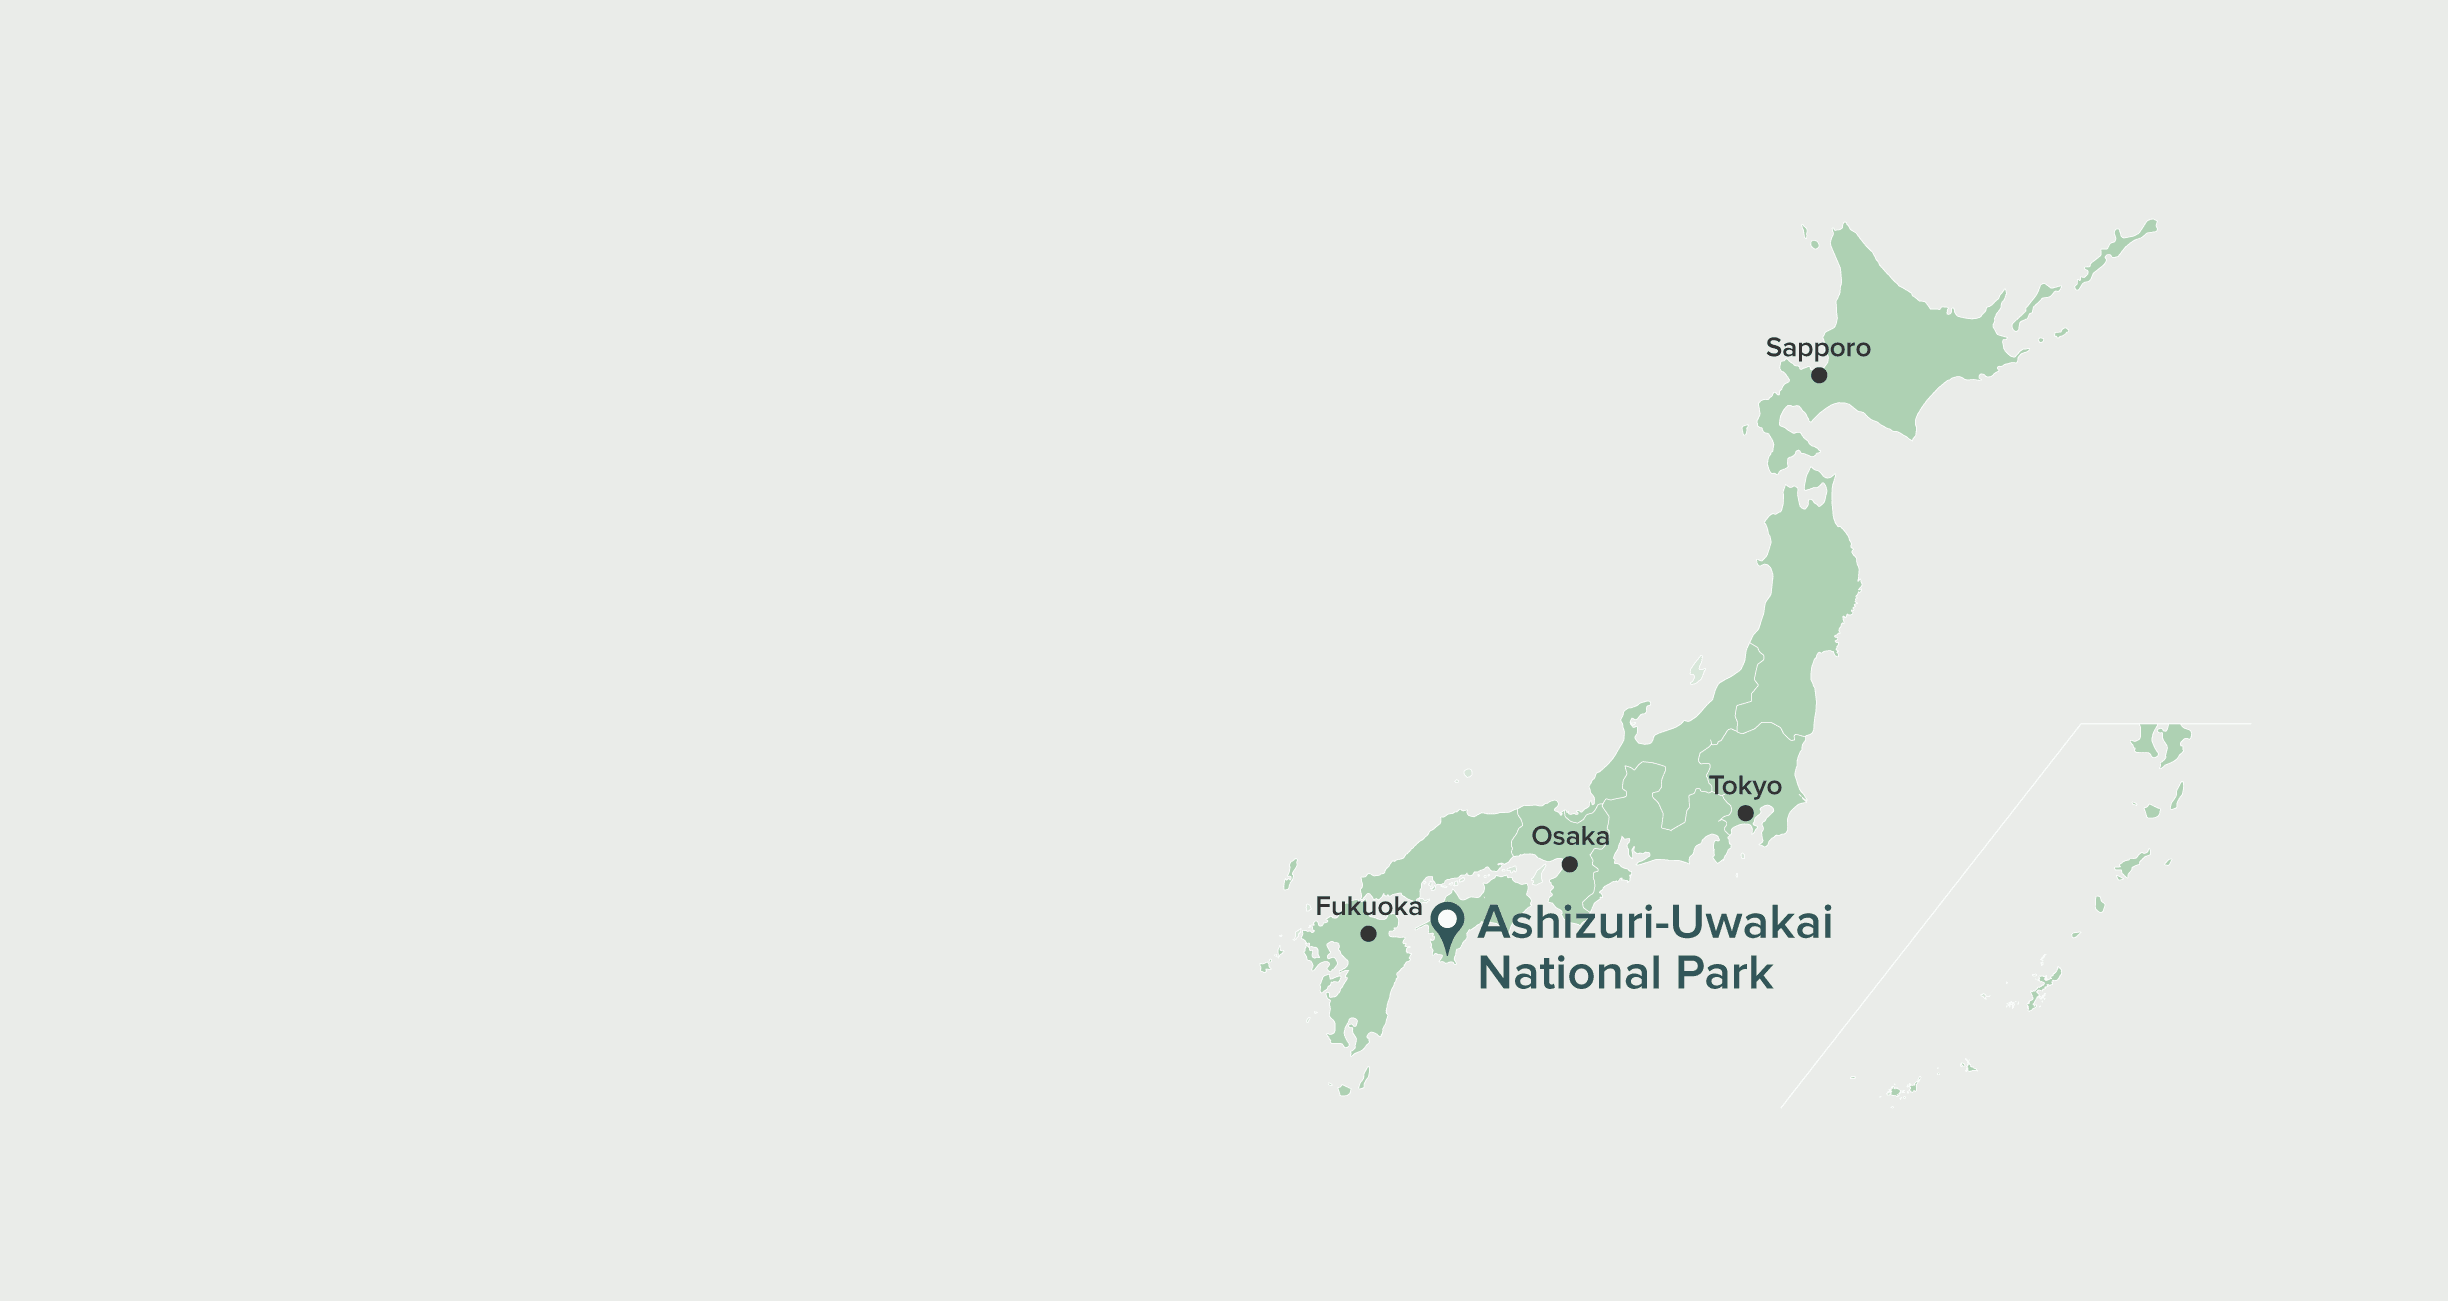 Parks Overview